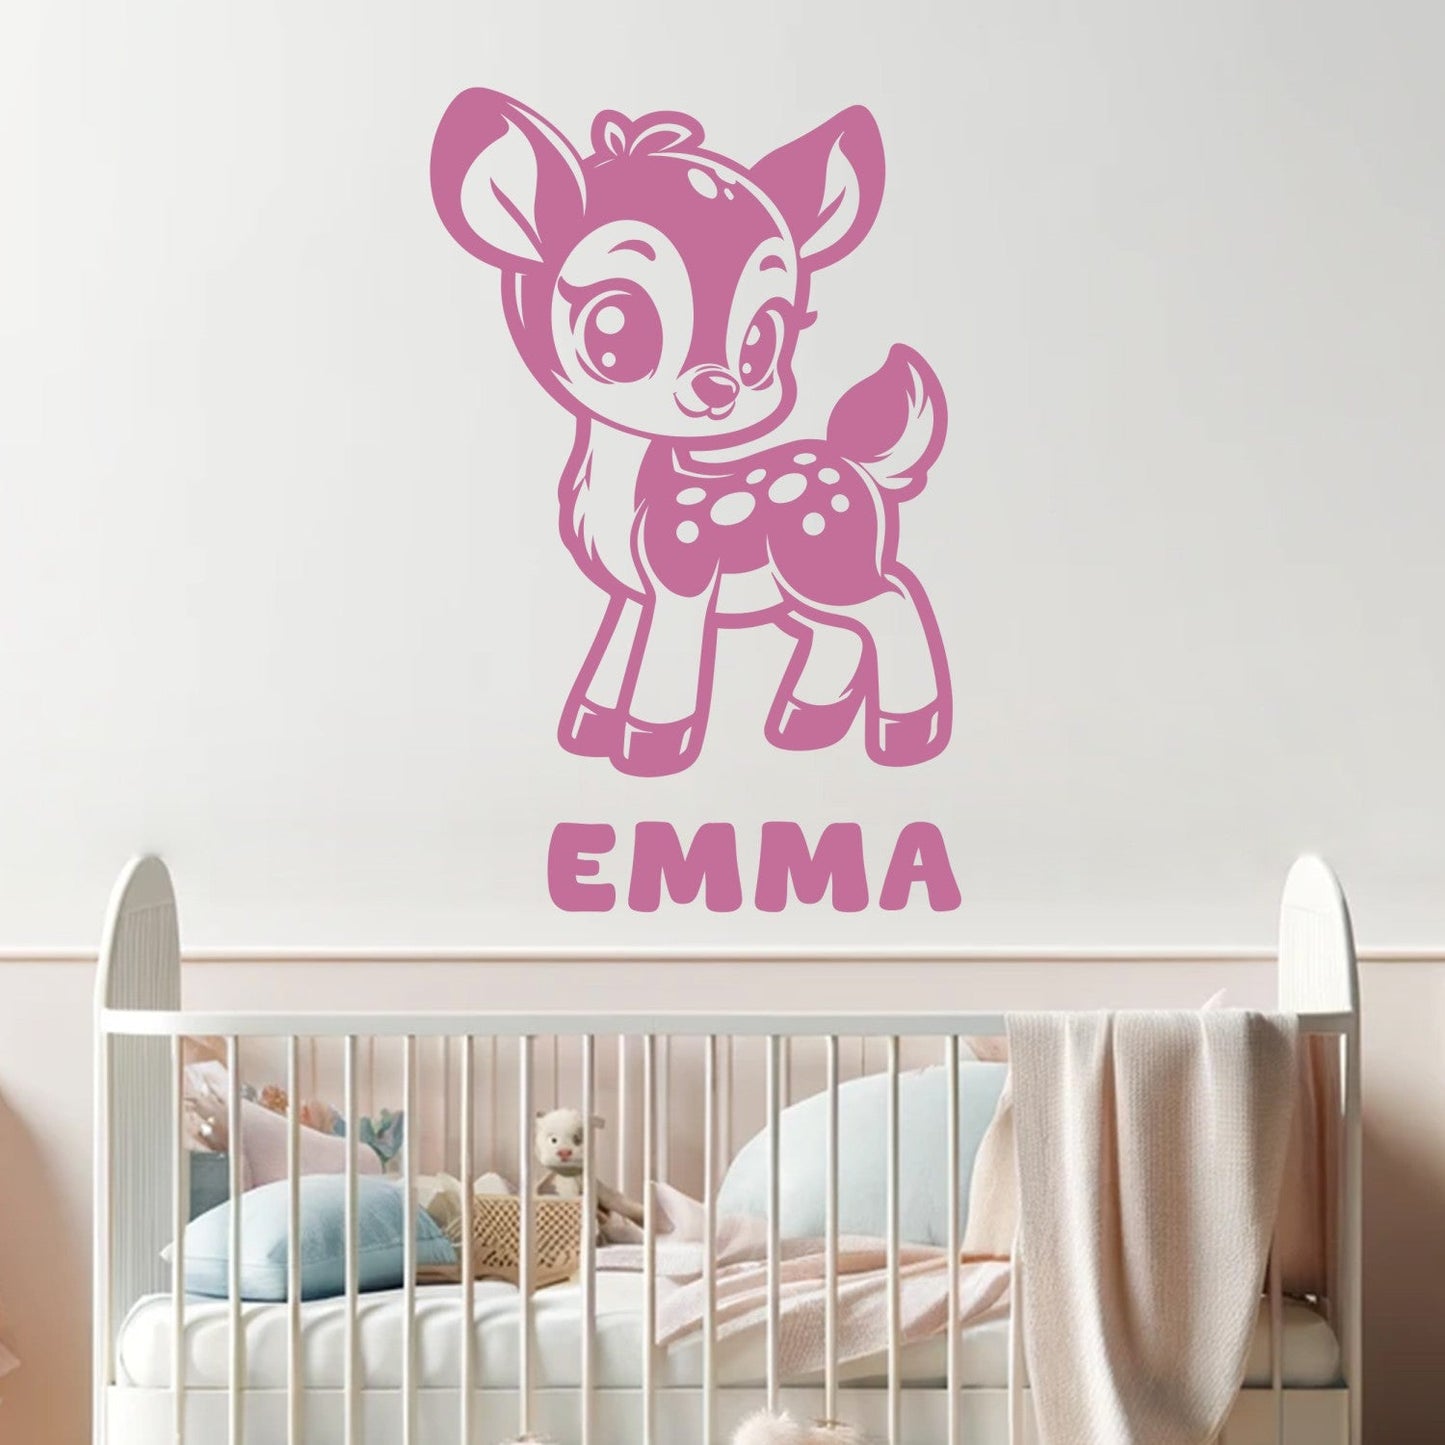 Fox Vinyl Sticker for Bedroom - Personalized Name Decal - Nursery Wall Decal - Name Stickers for Wall - Fox Wall Decal - Fox Wall Decals Nursery